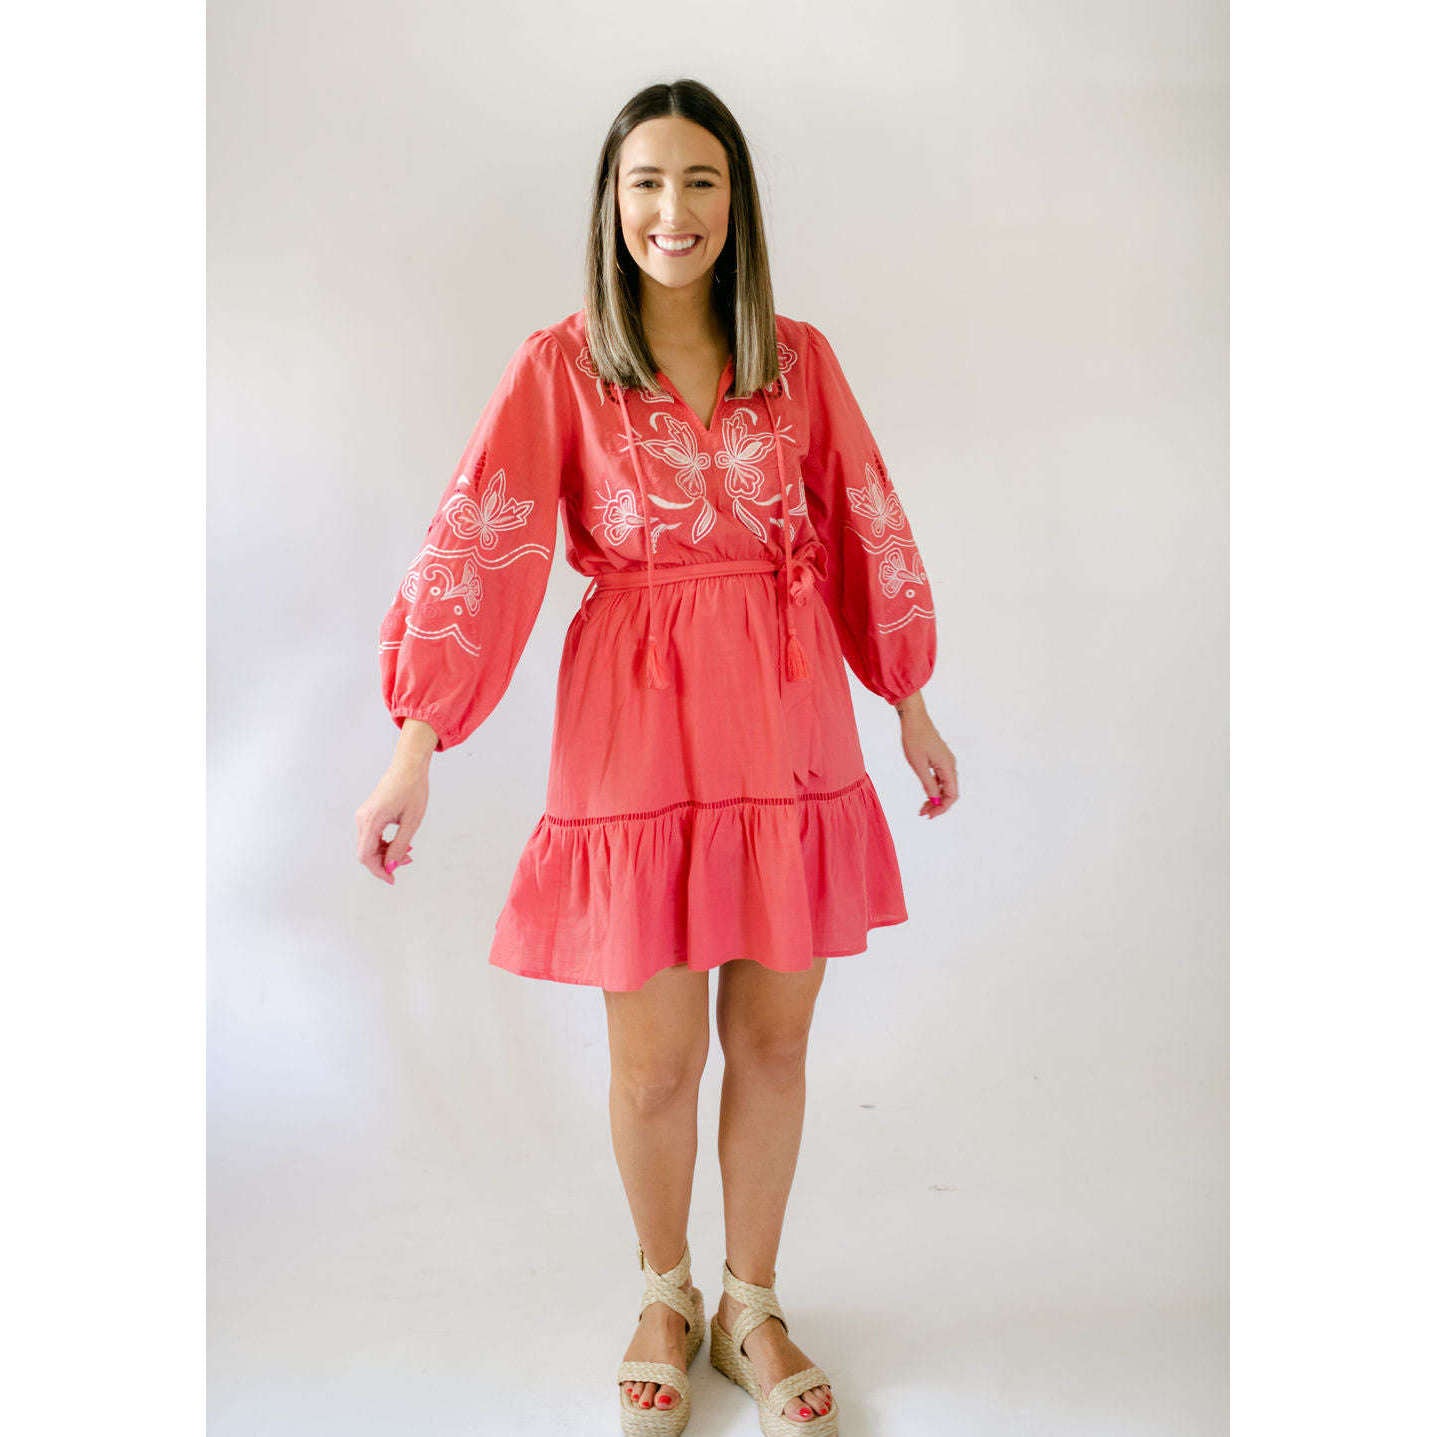 8.28 Boutique:8.28 Boutique,The Carson Eyelet Mini Dress in Coral,Dress